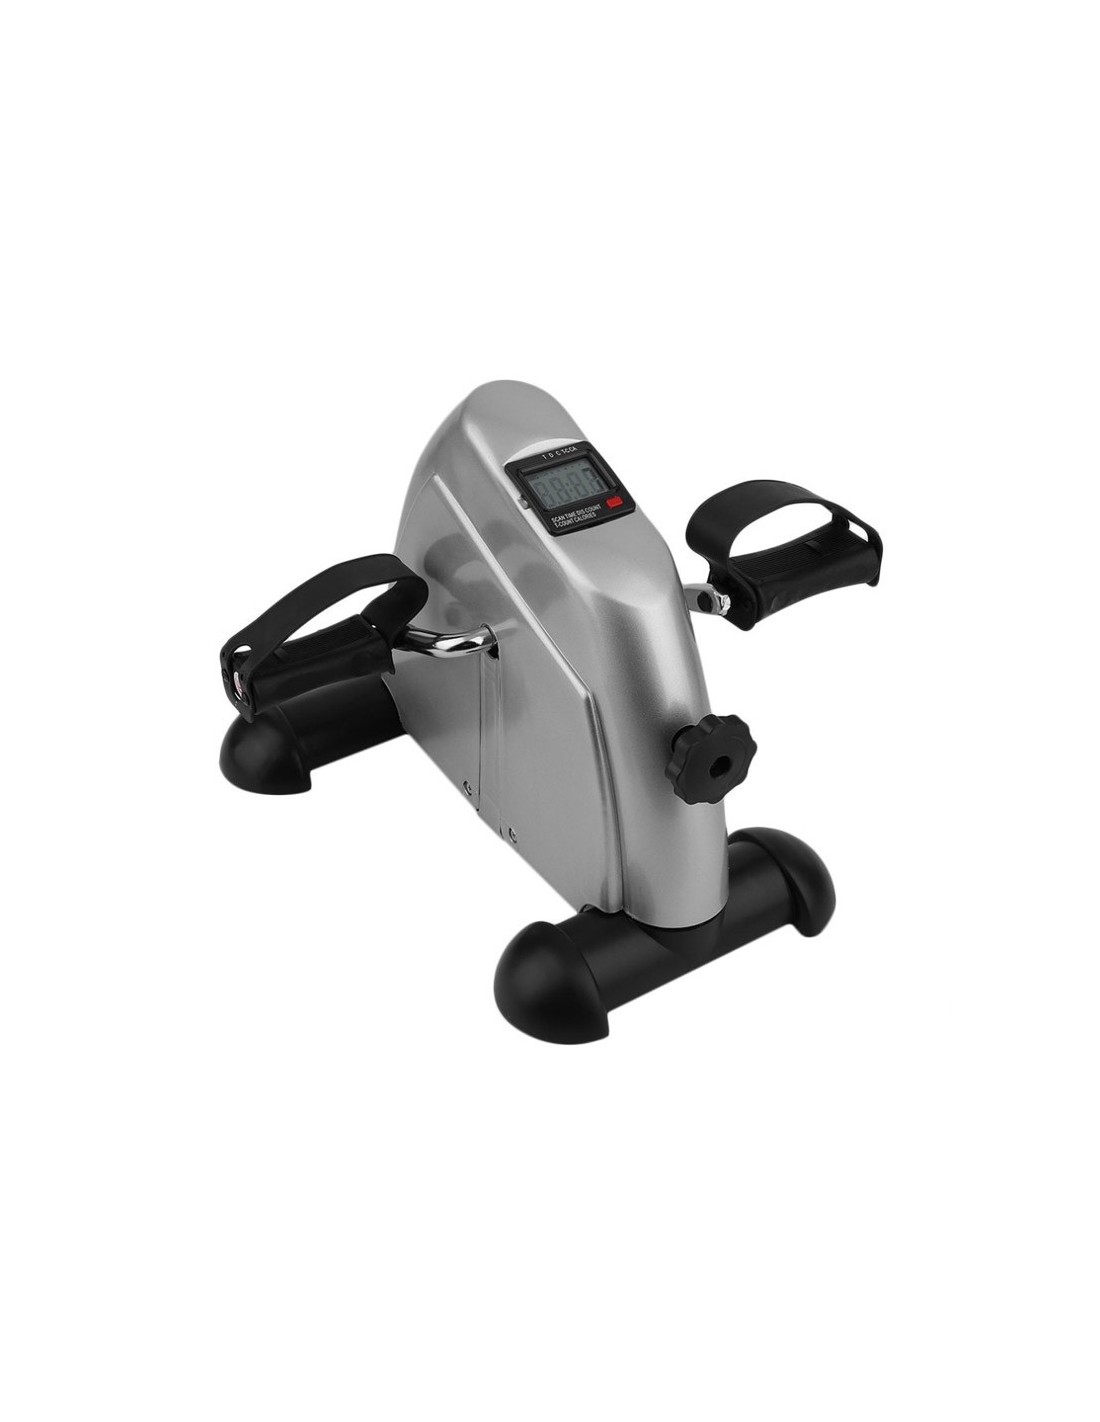 Exercise Cycle Fitness Mini Pedal Stepper Bike Indoor 4 Legs LCD Display Silver 